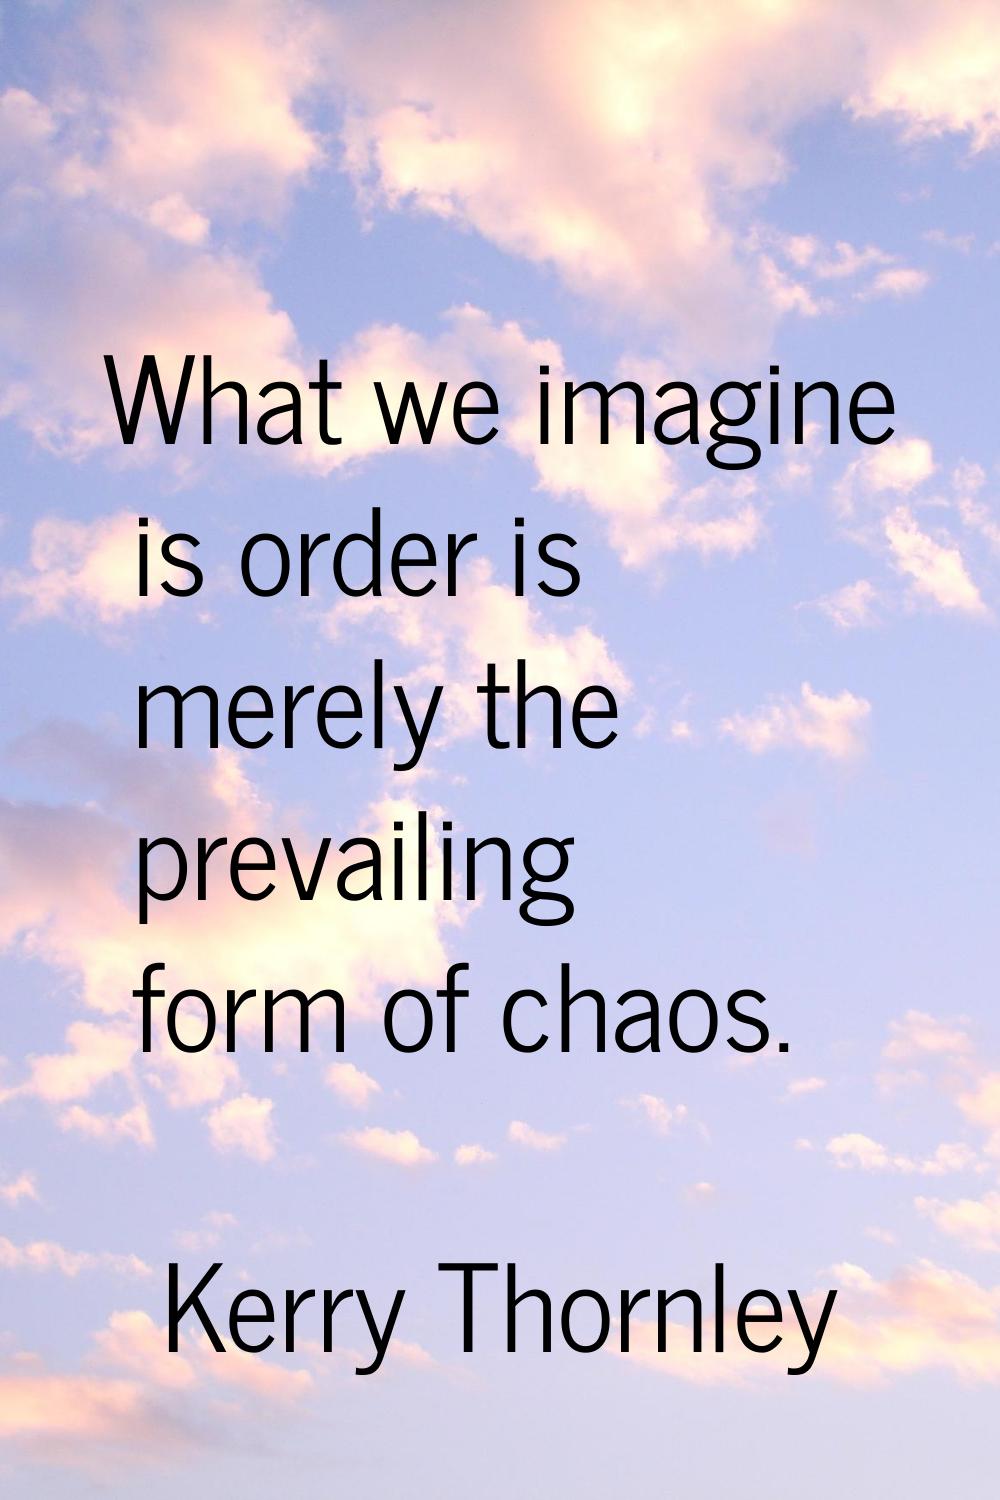 What we imagine is order is merely the prevailing form of chaos.